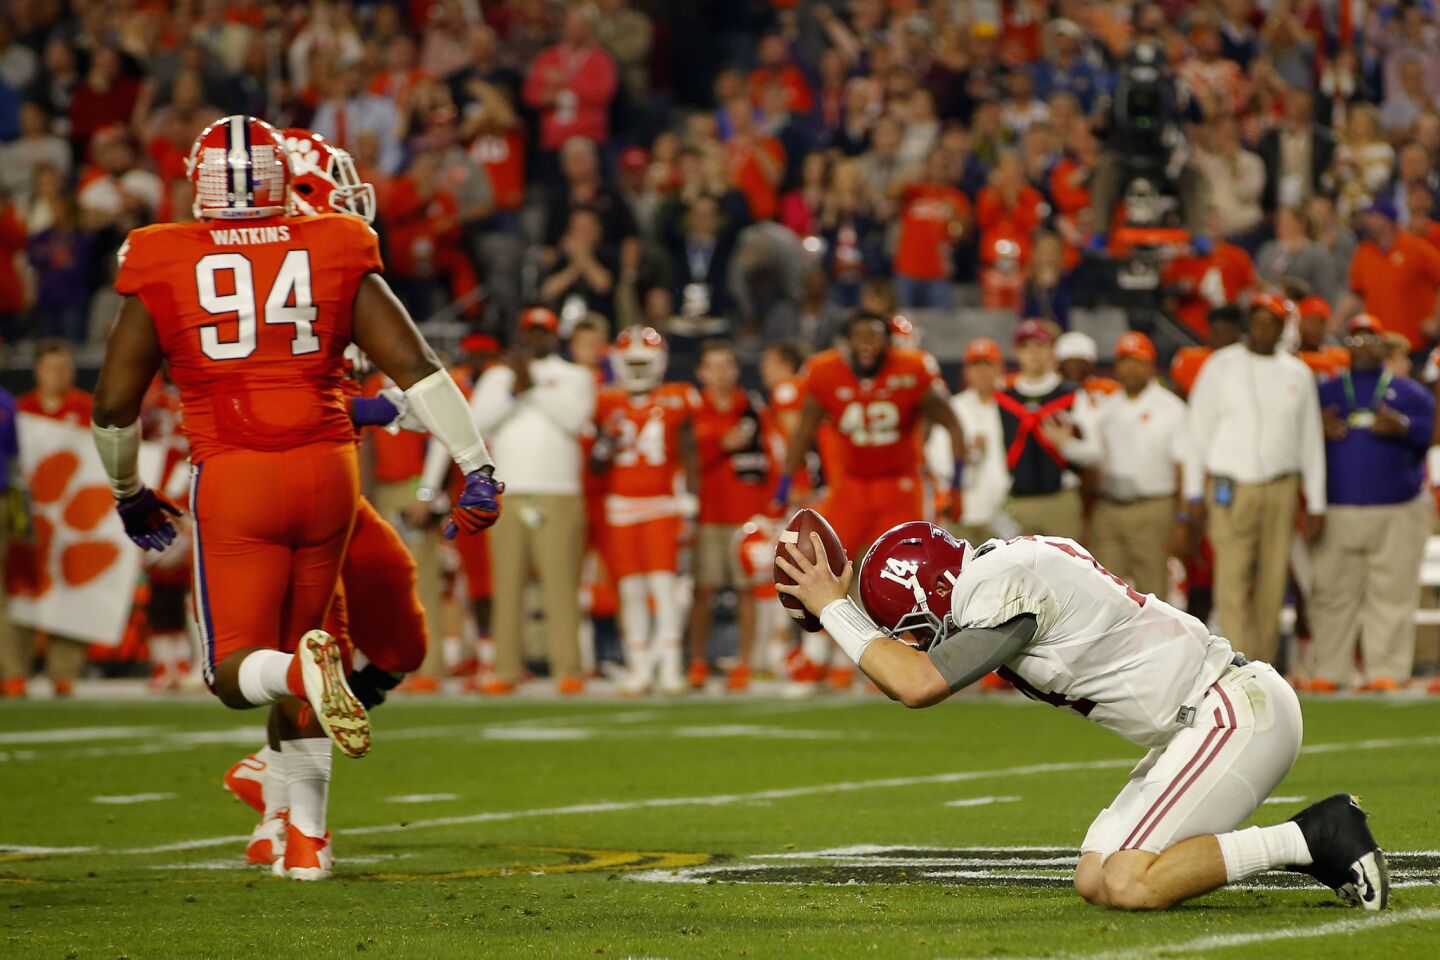 Alabama quarterback Jake Coker reacts after getting sacked by Clemson's Shaq Lawson in the second quarter.